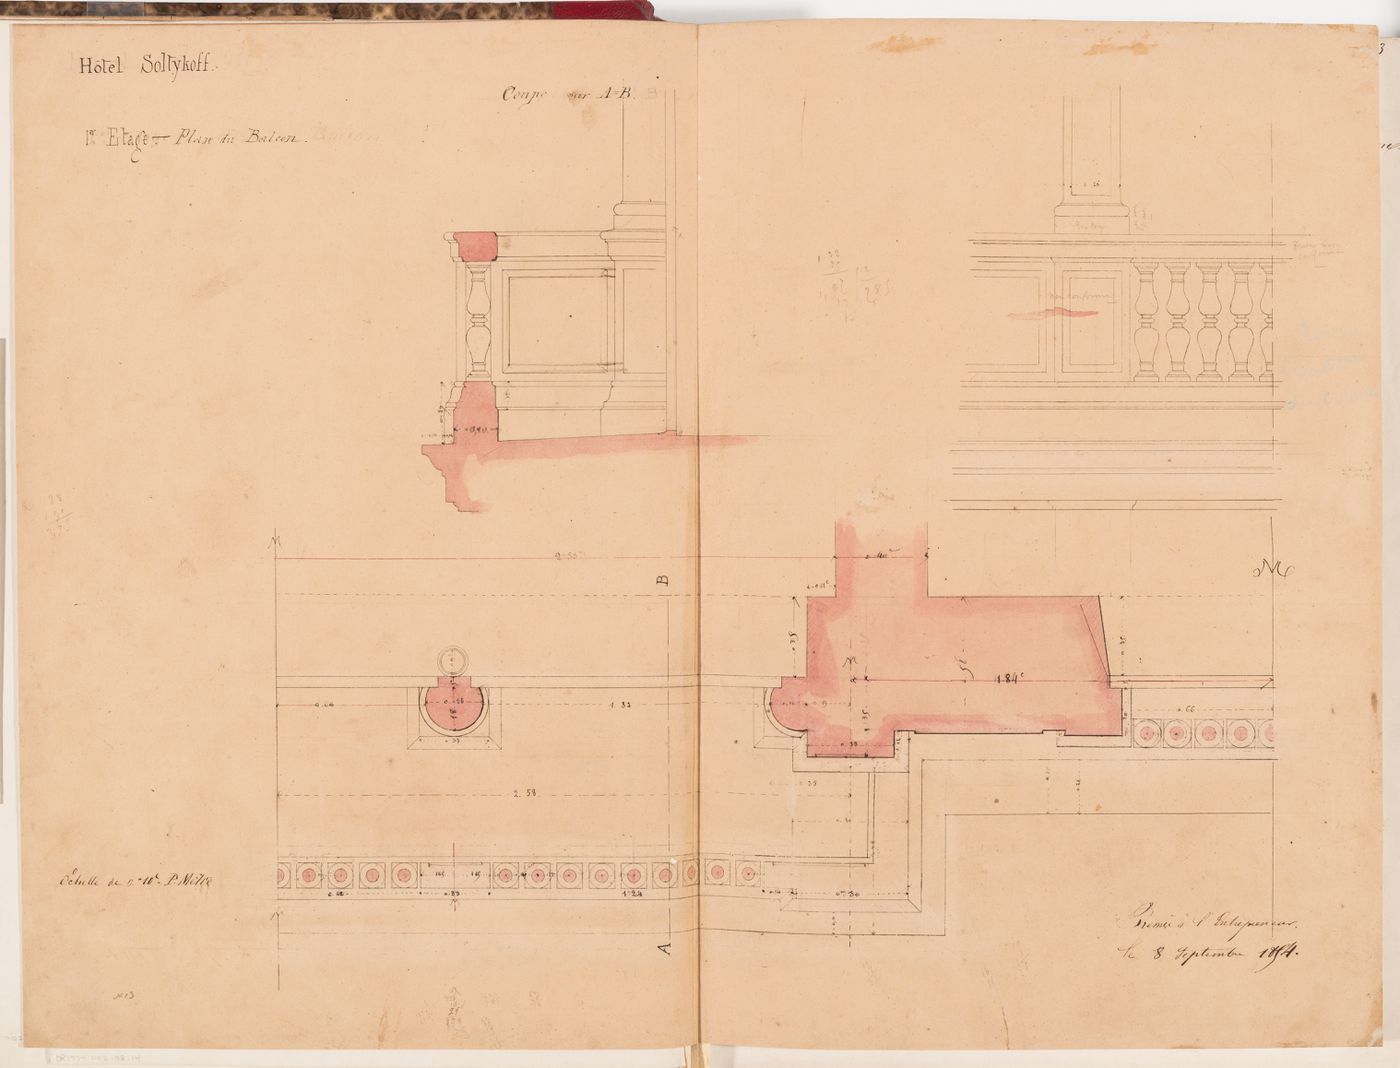 Section, partial elevation and half plan for the first floor balcony, Hôtel Soltykoff